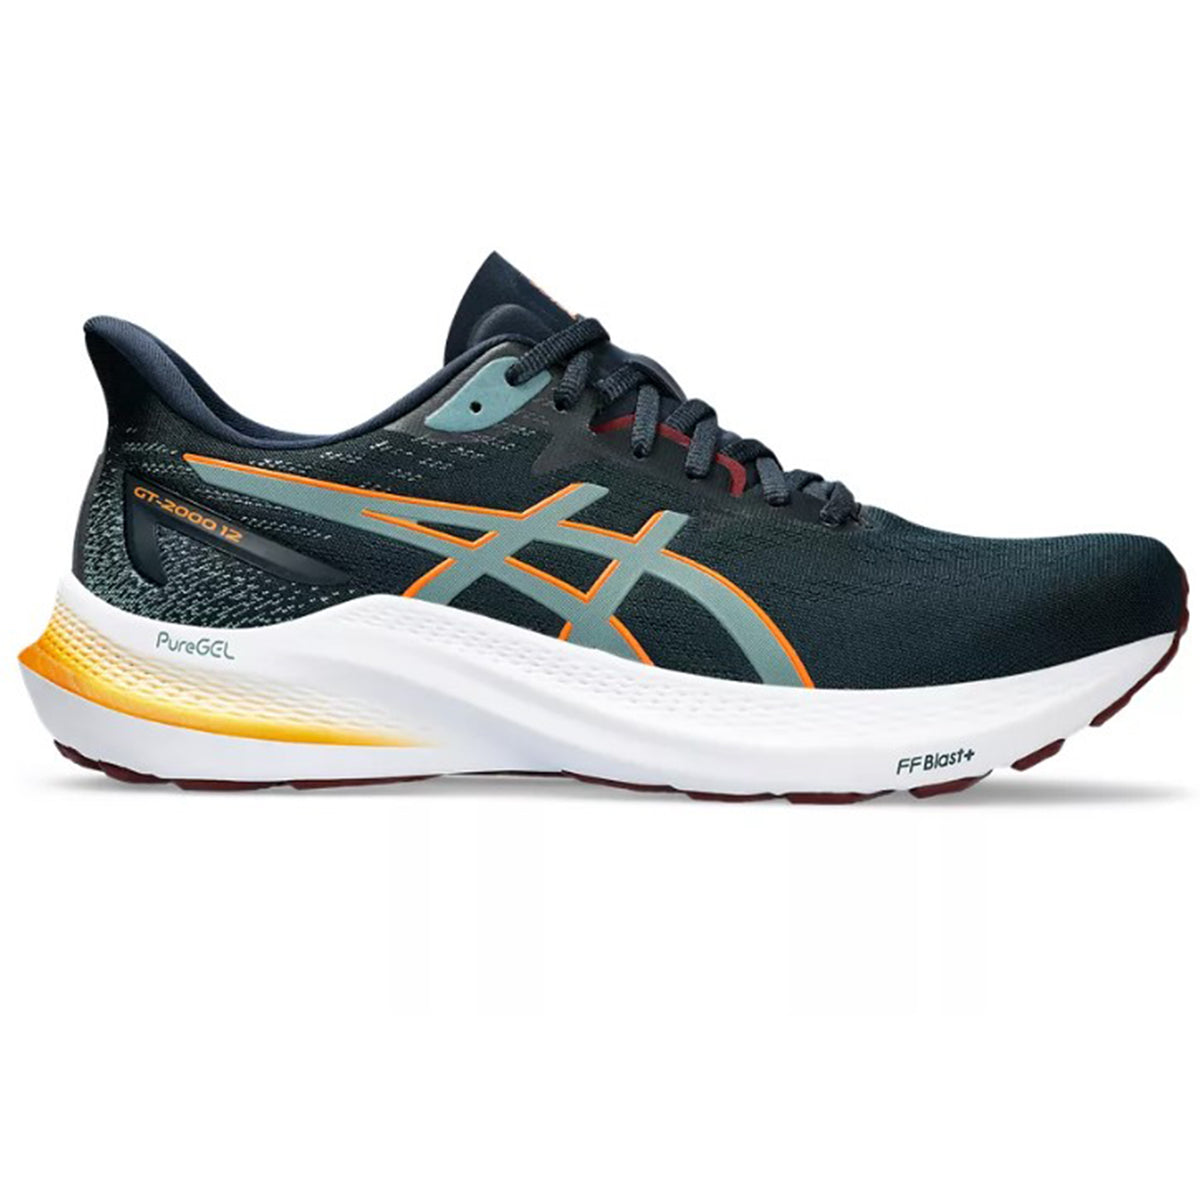 Asics GT2000 12 Mens Running Shoes: French Blue/Foggy Teal